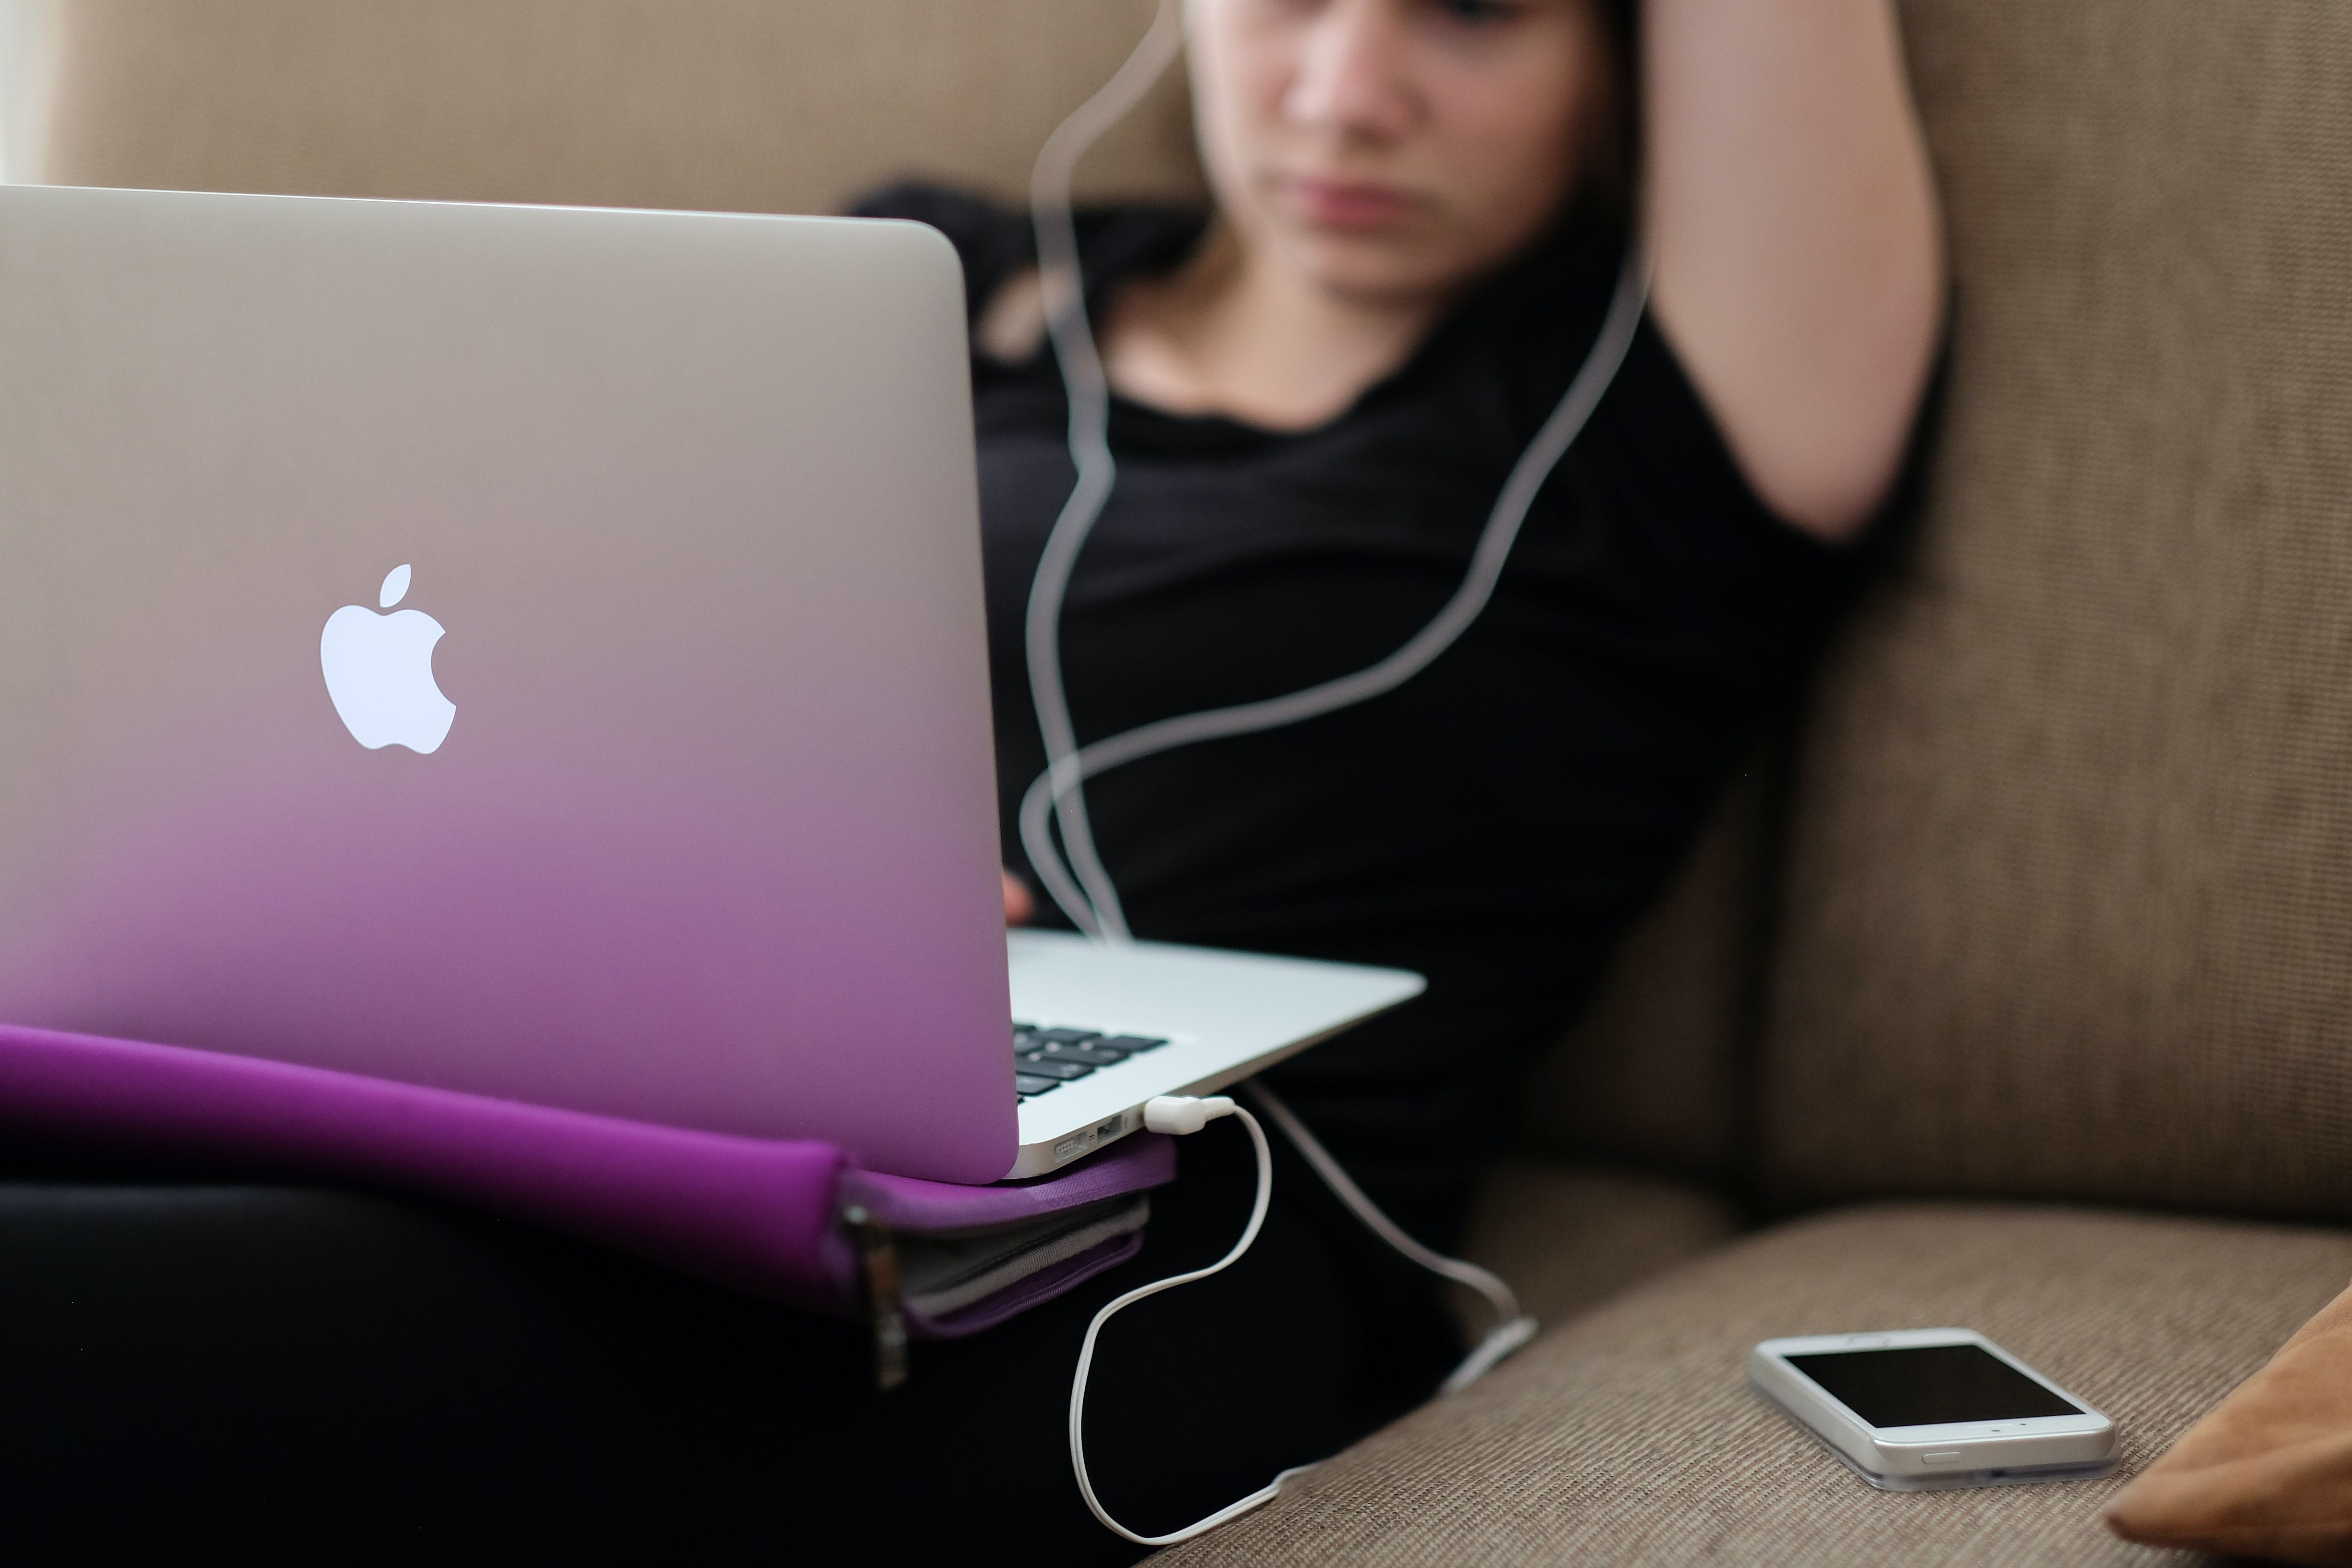 A person wearing a simple earbuds headset uses a Macbook.